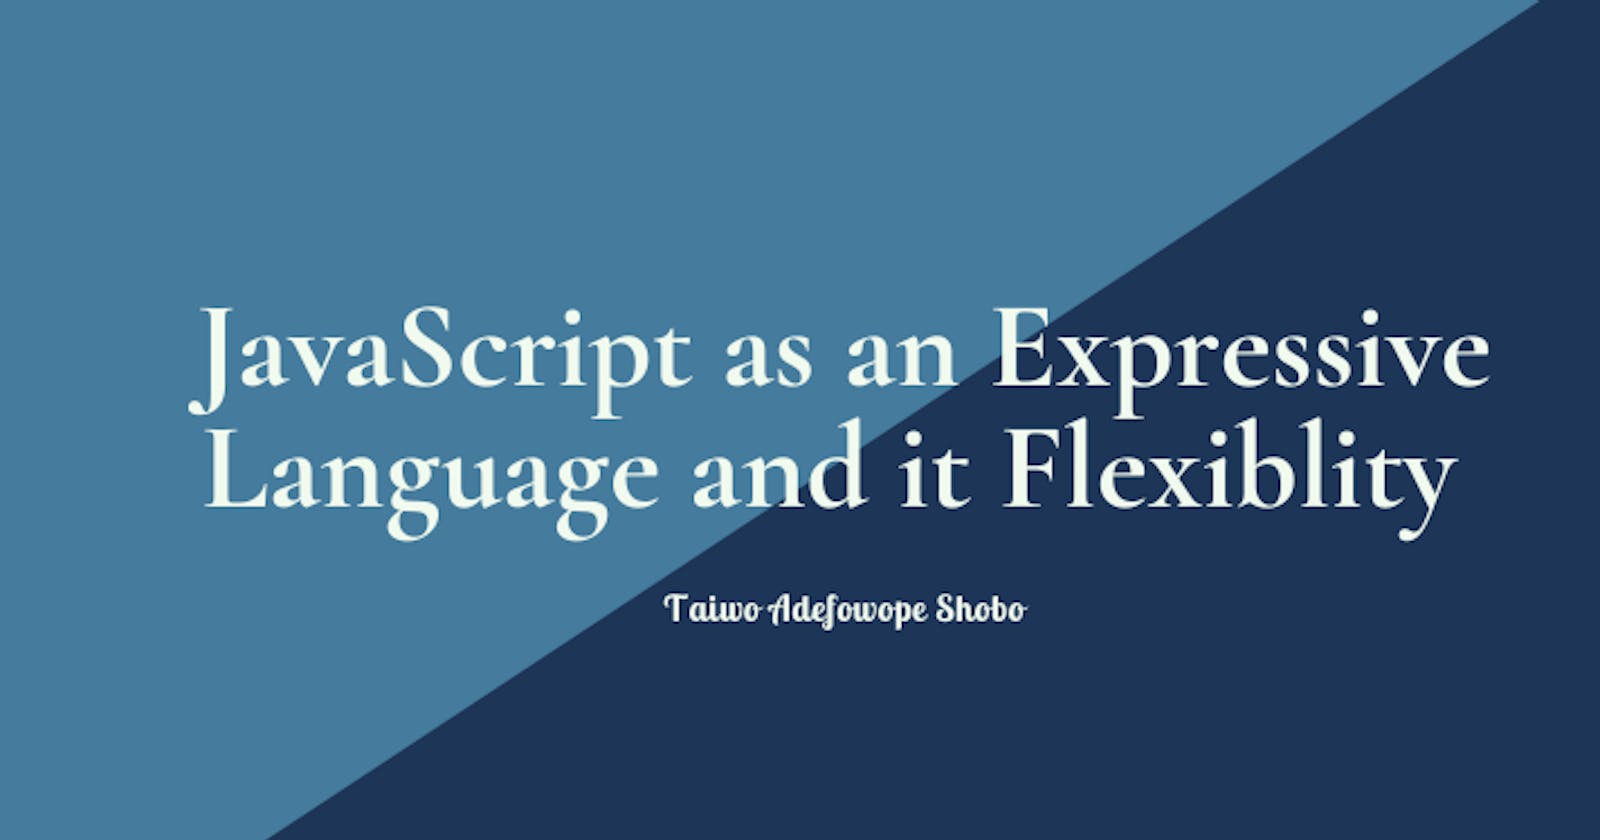 JavaScript as an Expressive Language and its Flexibility